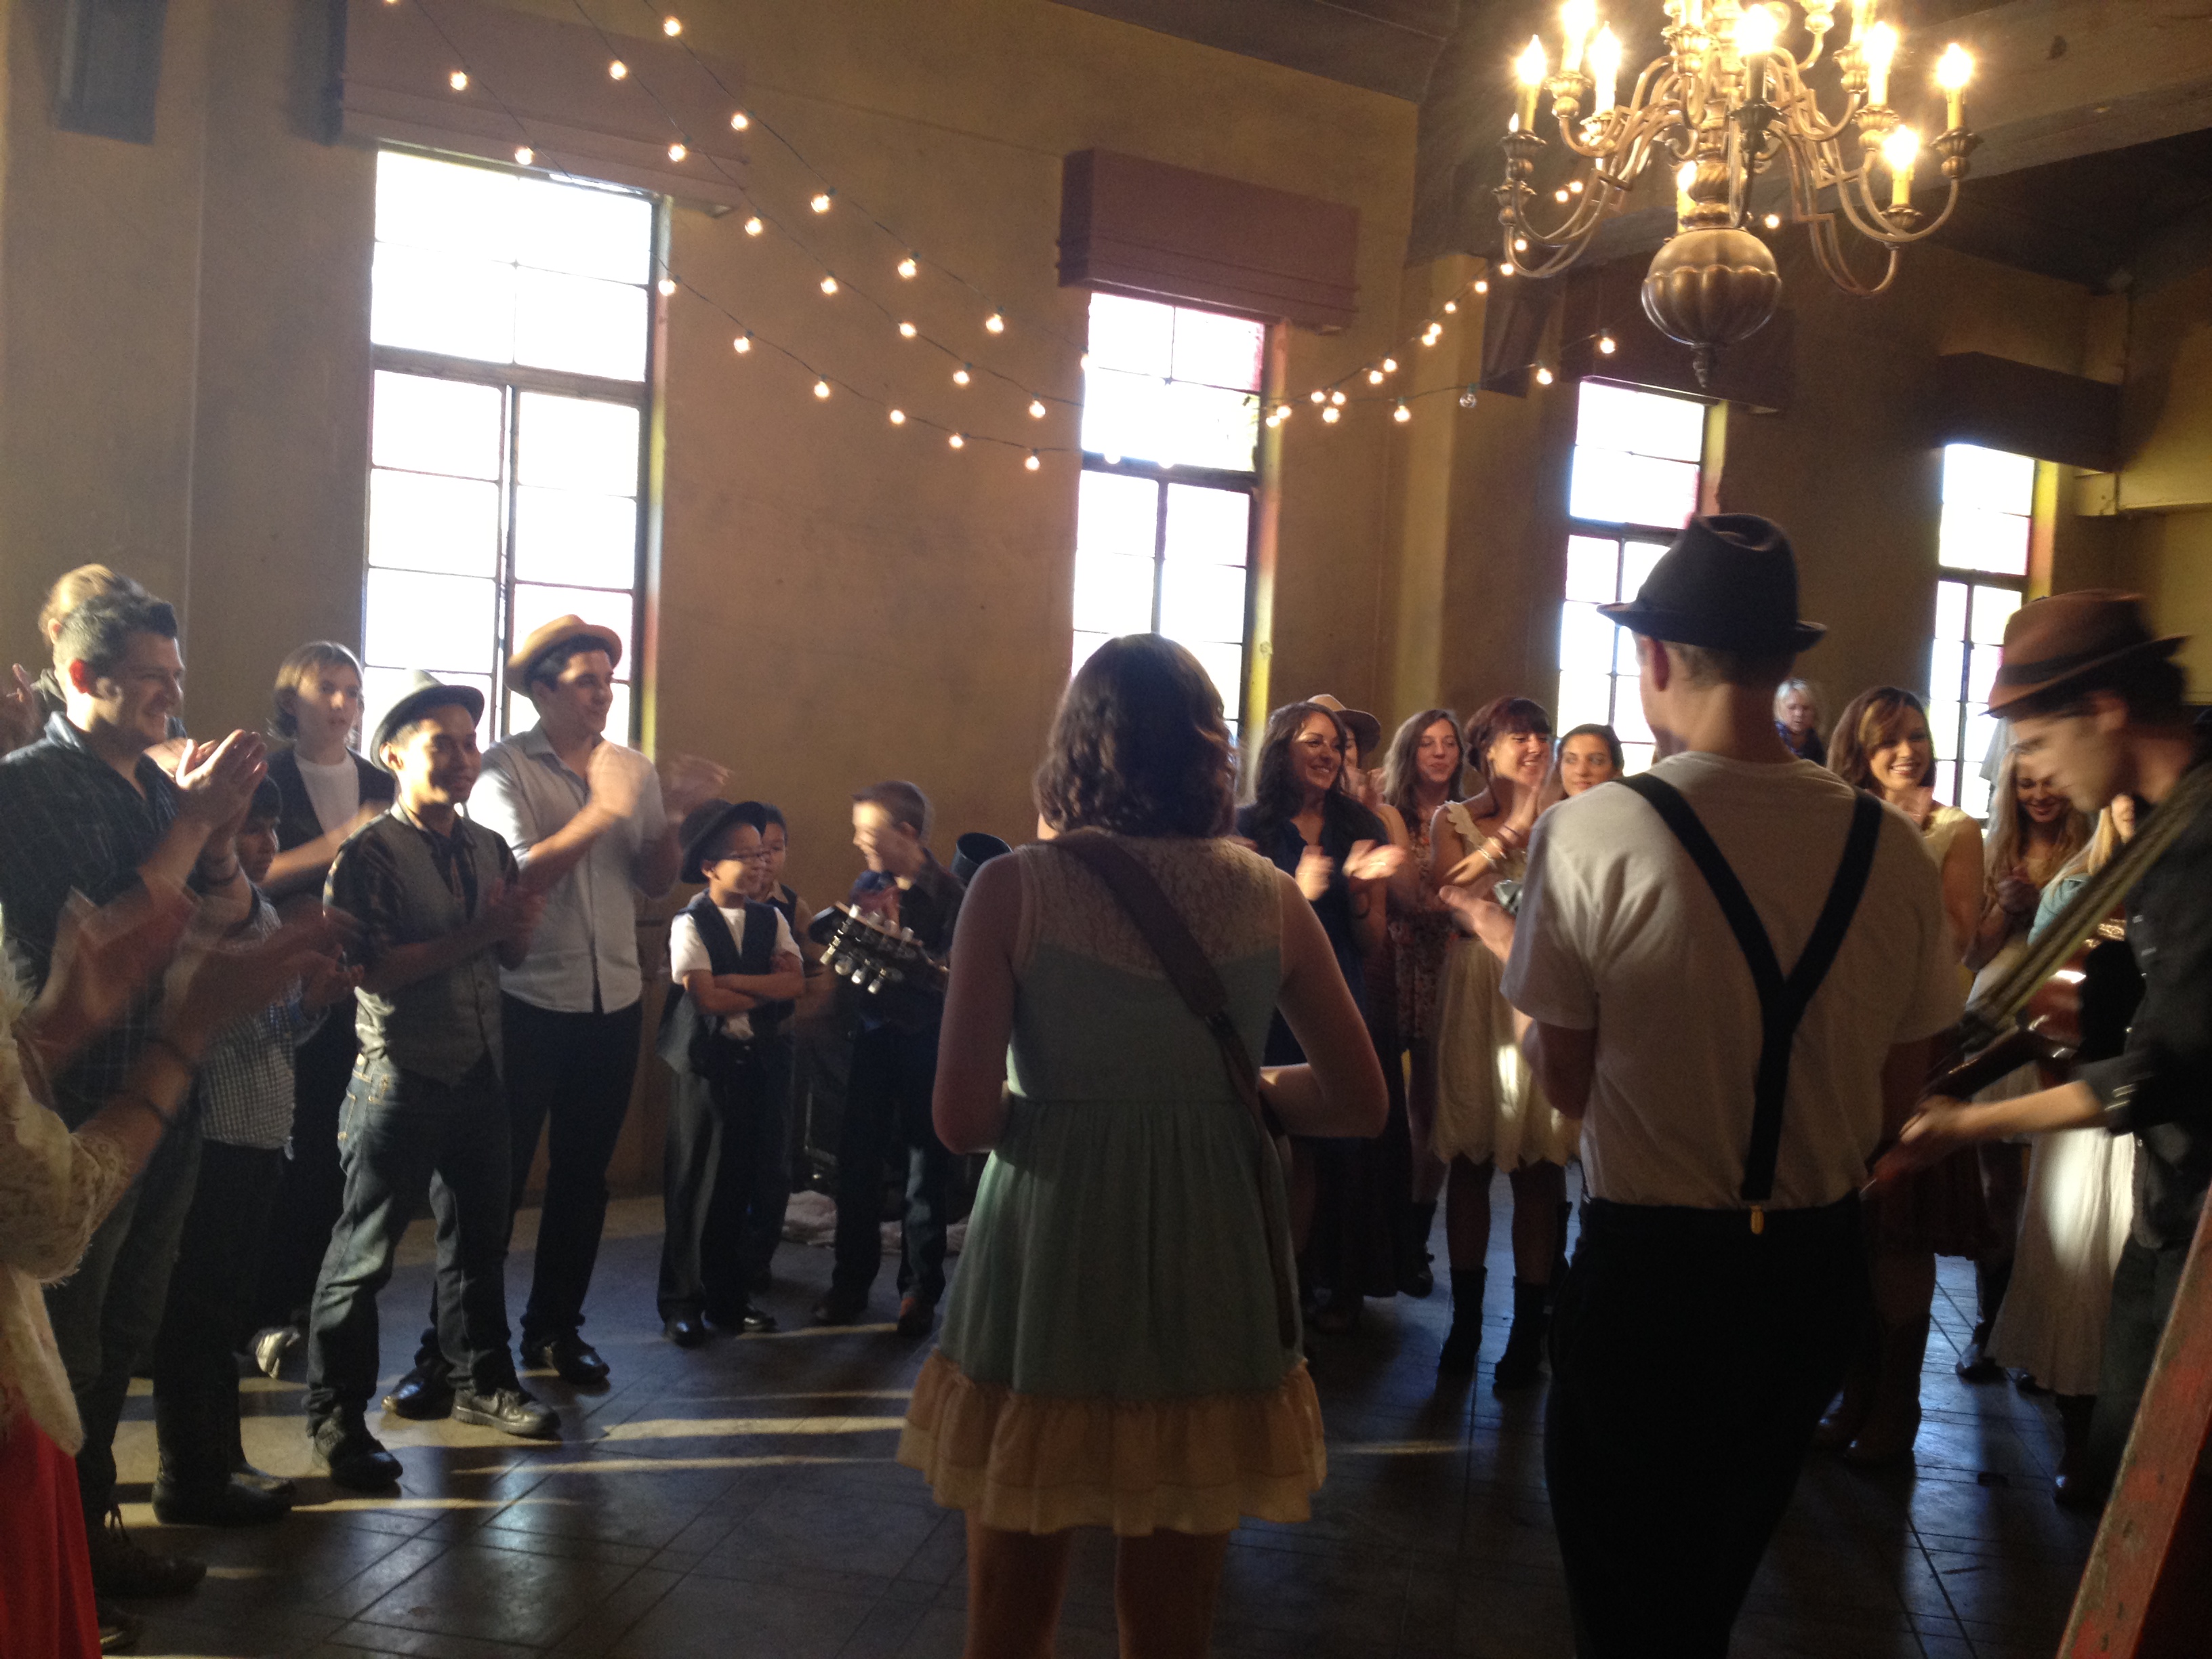 On set of the music video Ho Hey by the Lumineers, Adam is on the left.